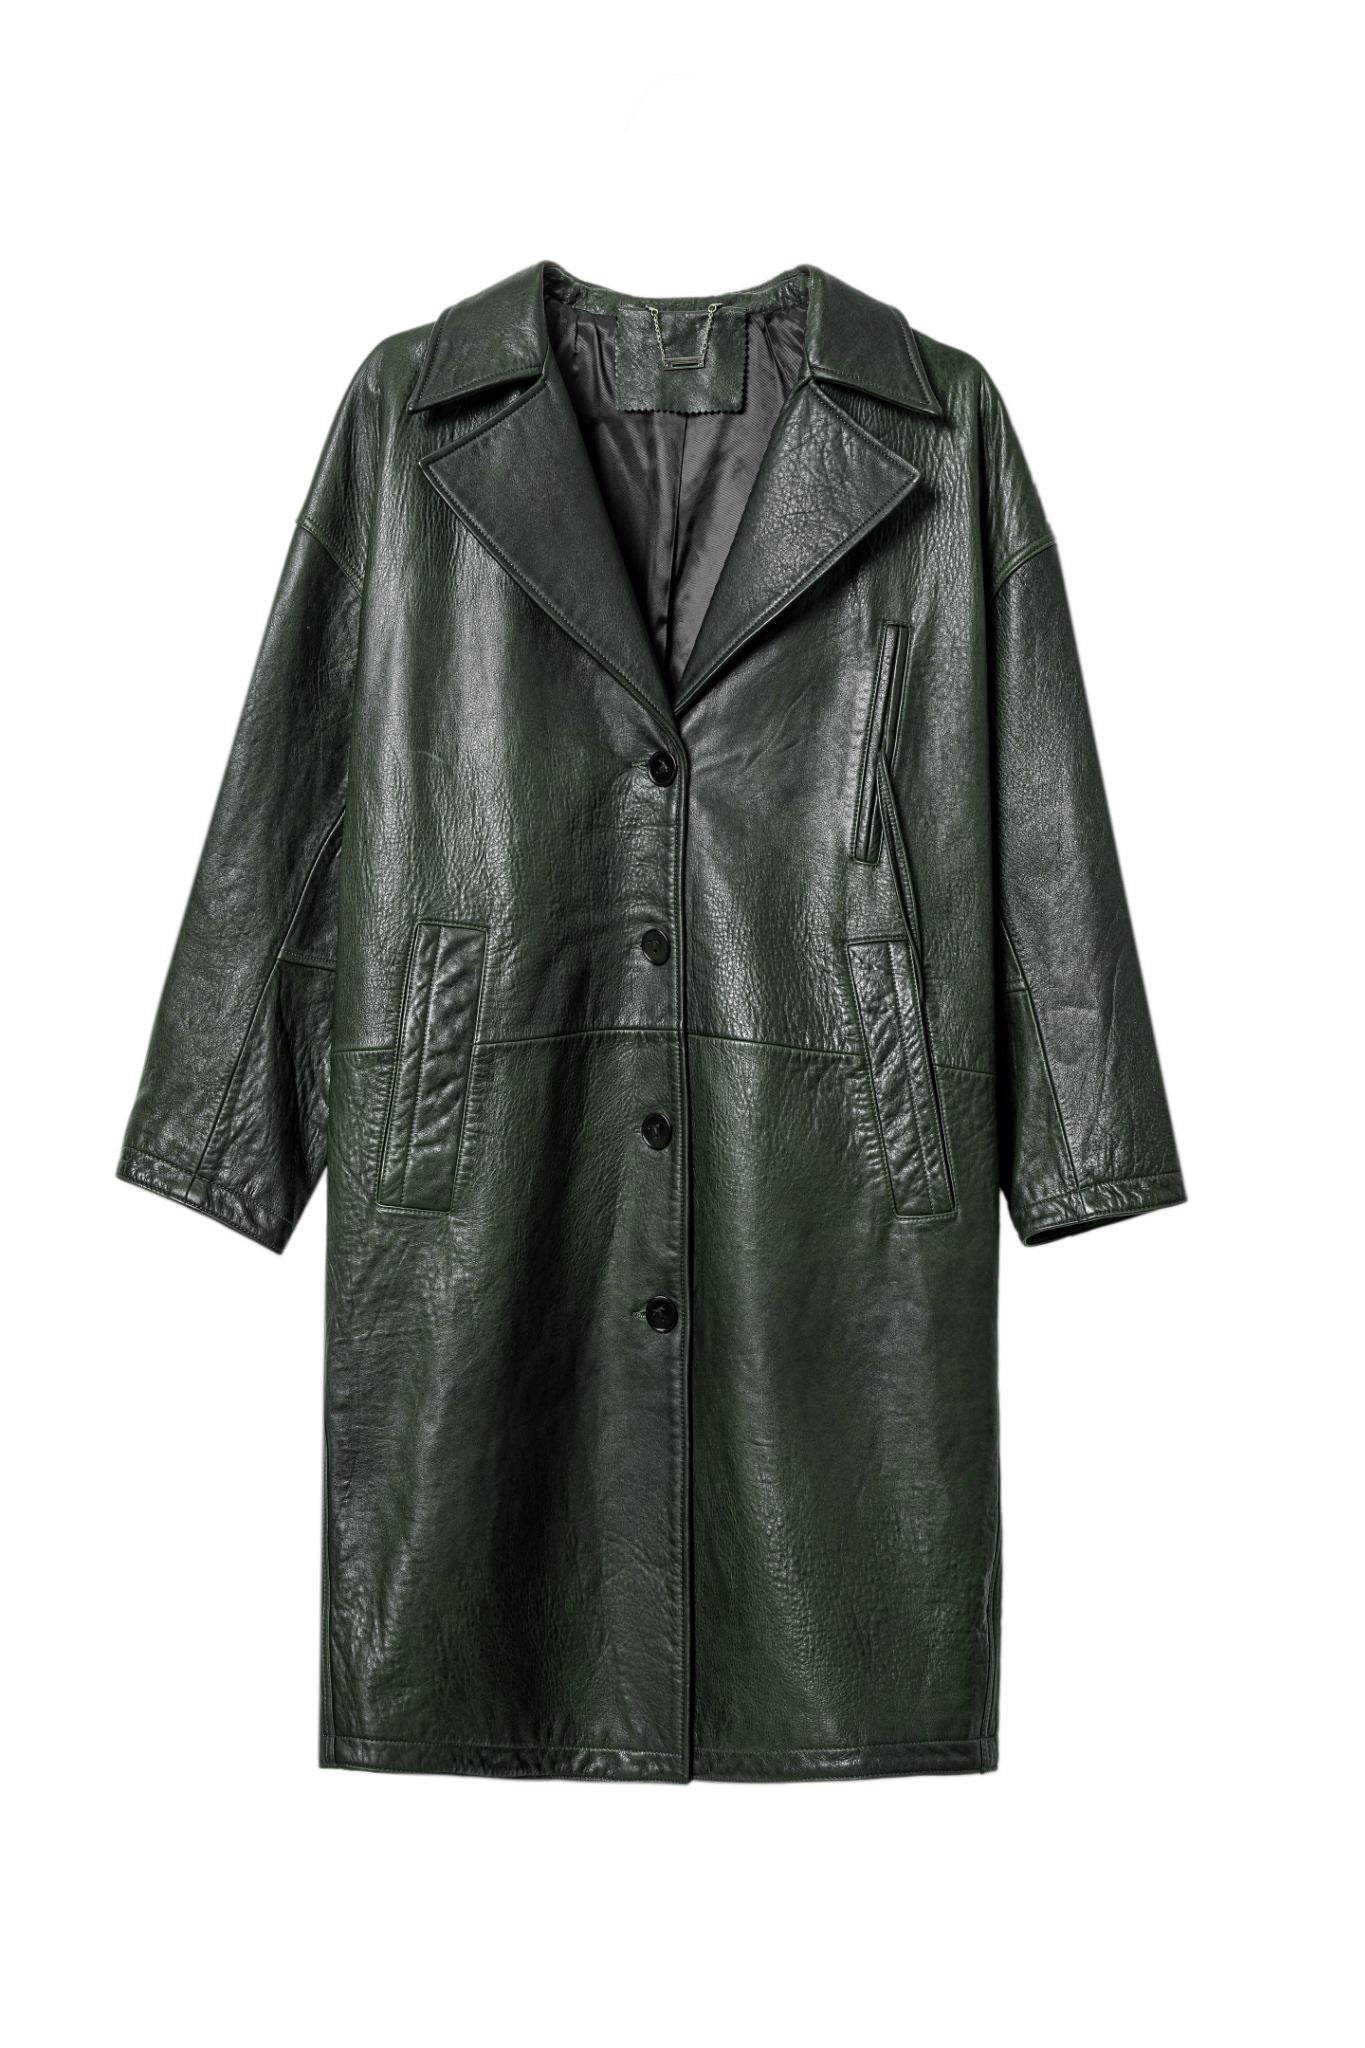 Classic Long Leather Car Coat for Everyday Elegance